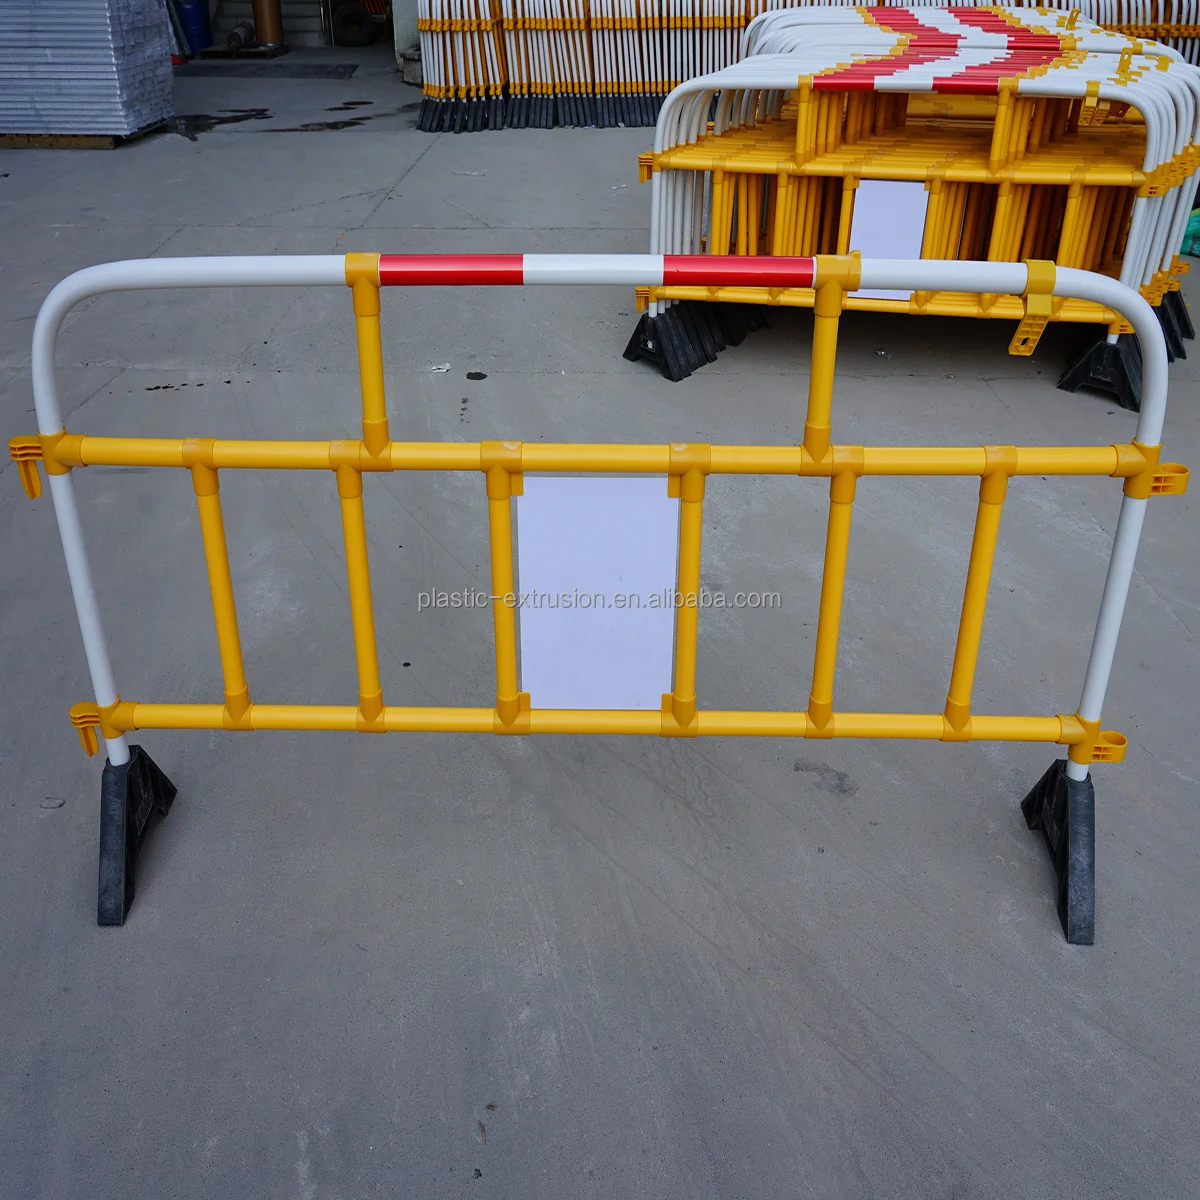 Plastic Barrier for Work Zones Removable temporary PVC Fence Blocker Barrier Special Events Channelizing Pedestrian Barrier